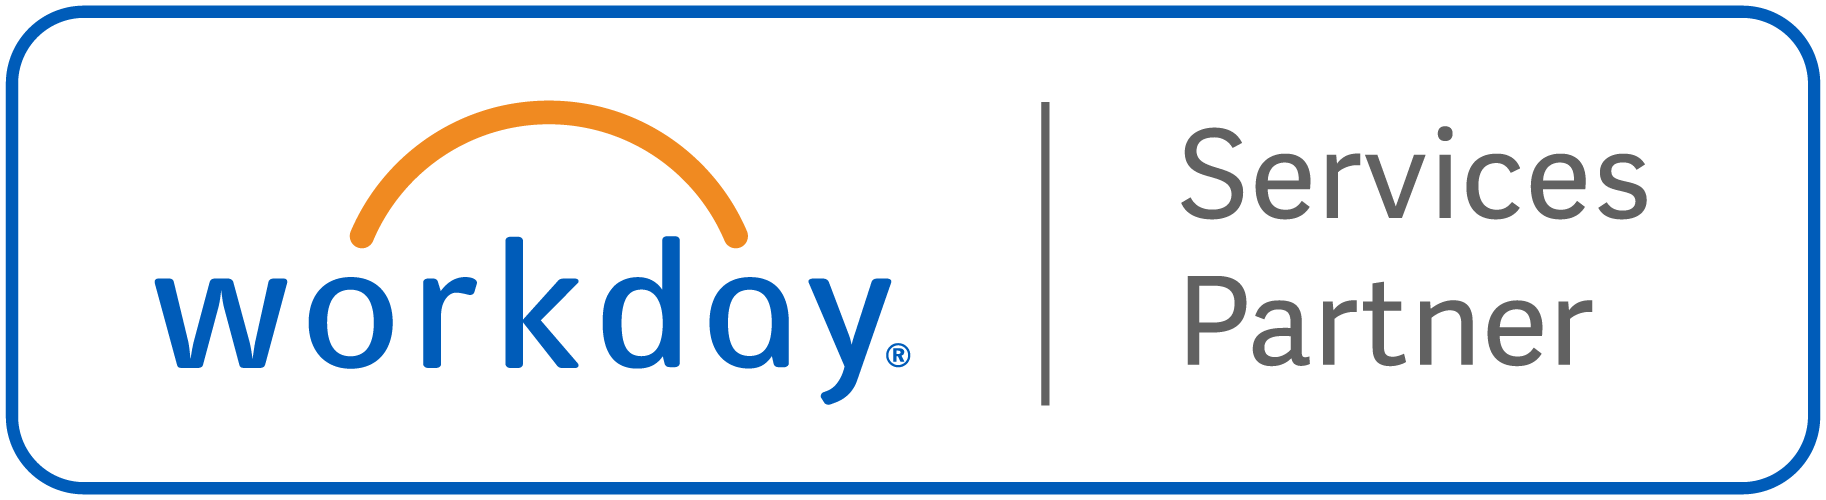 Workday Services Partner